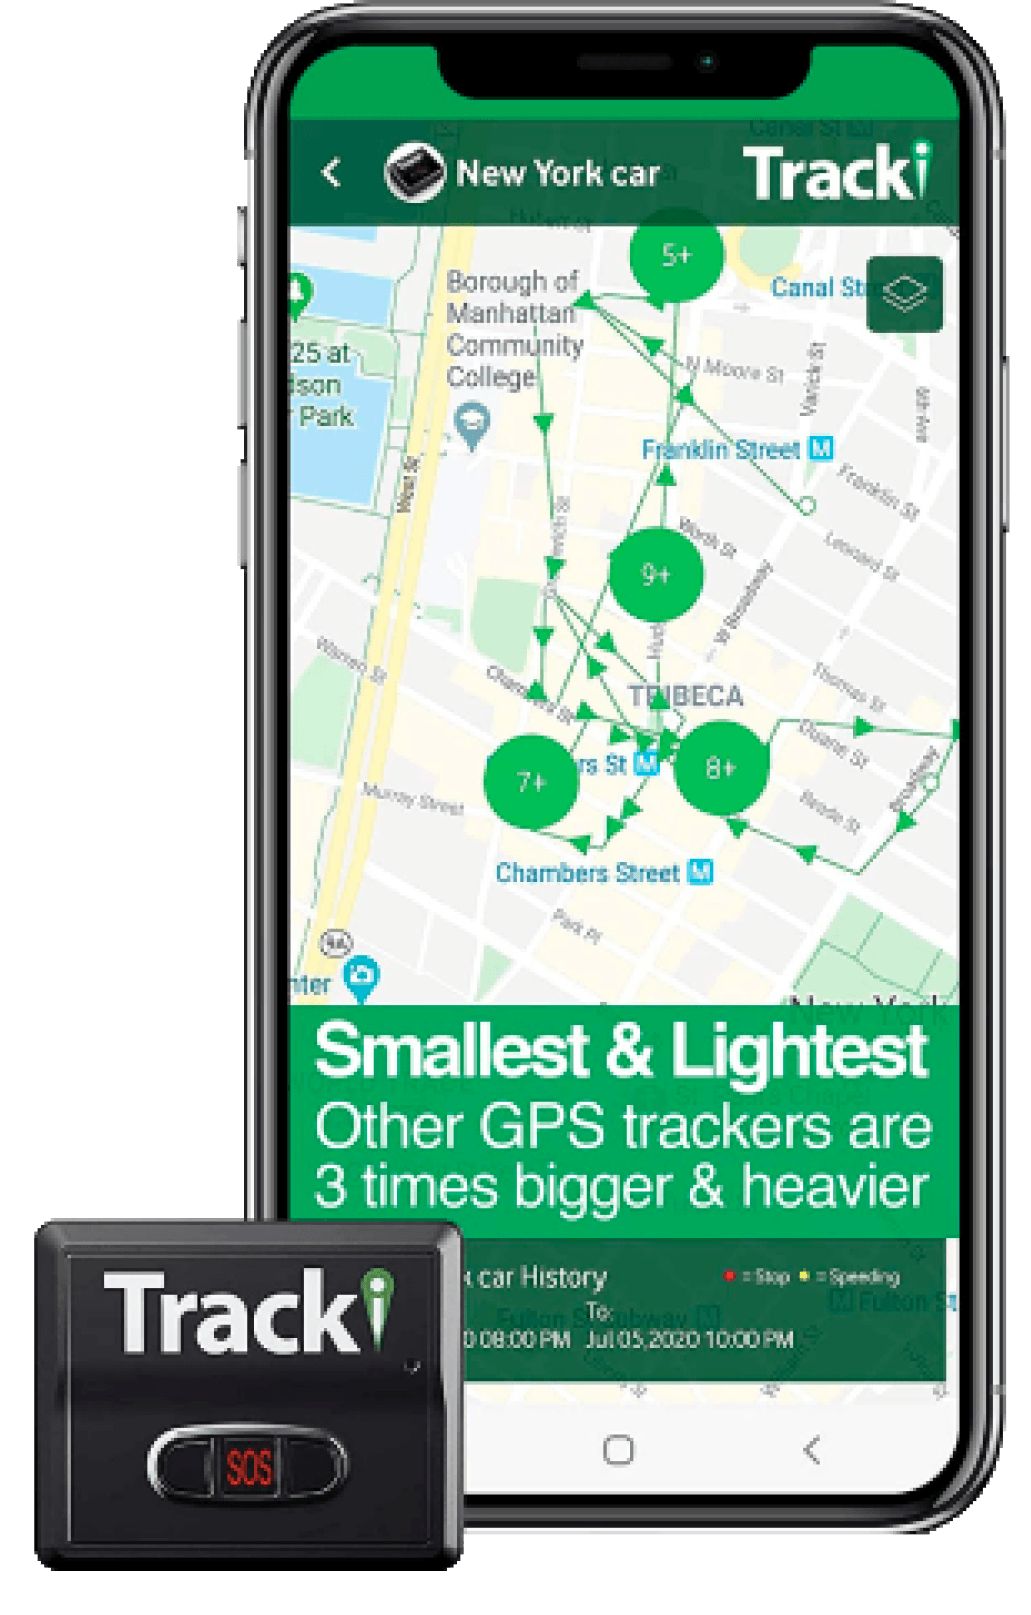 GPS Trackers – Top 5 Things You Can Track With A GPS Tracker